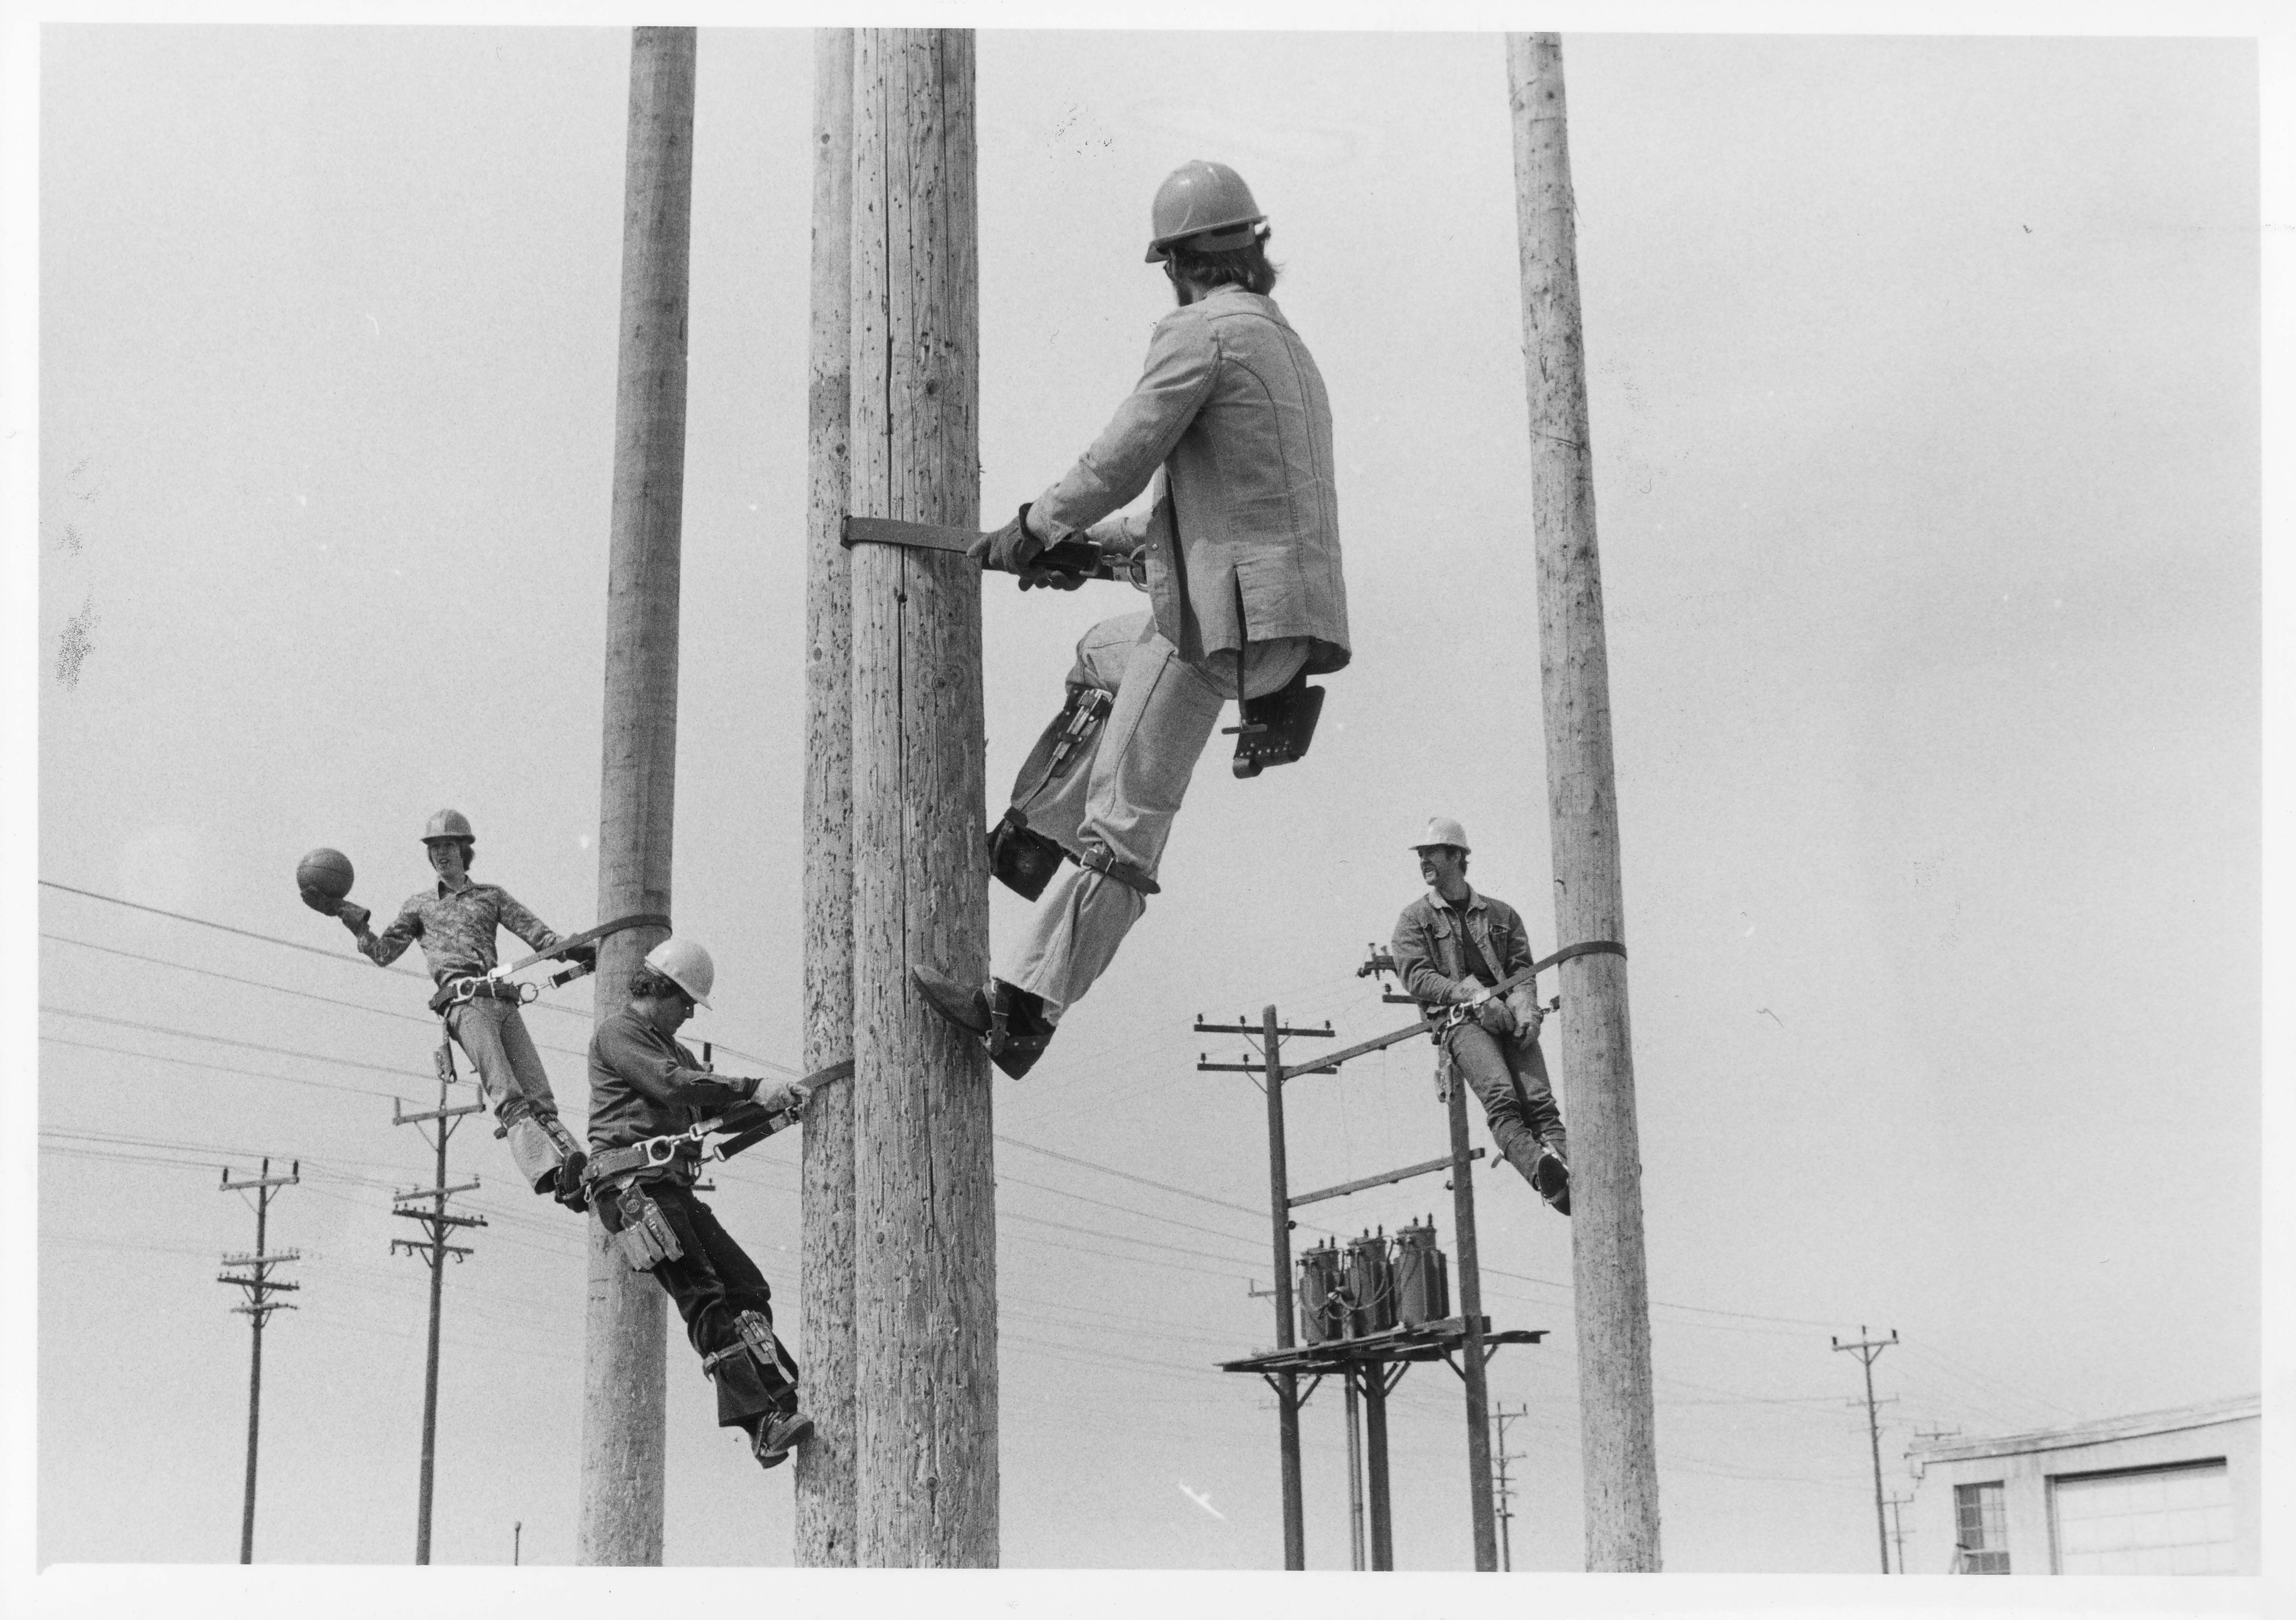 Electrical Line Work